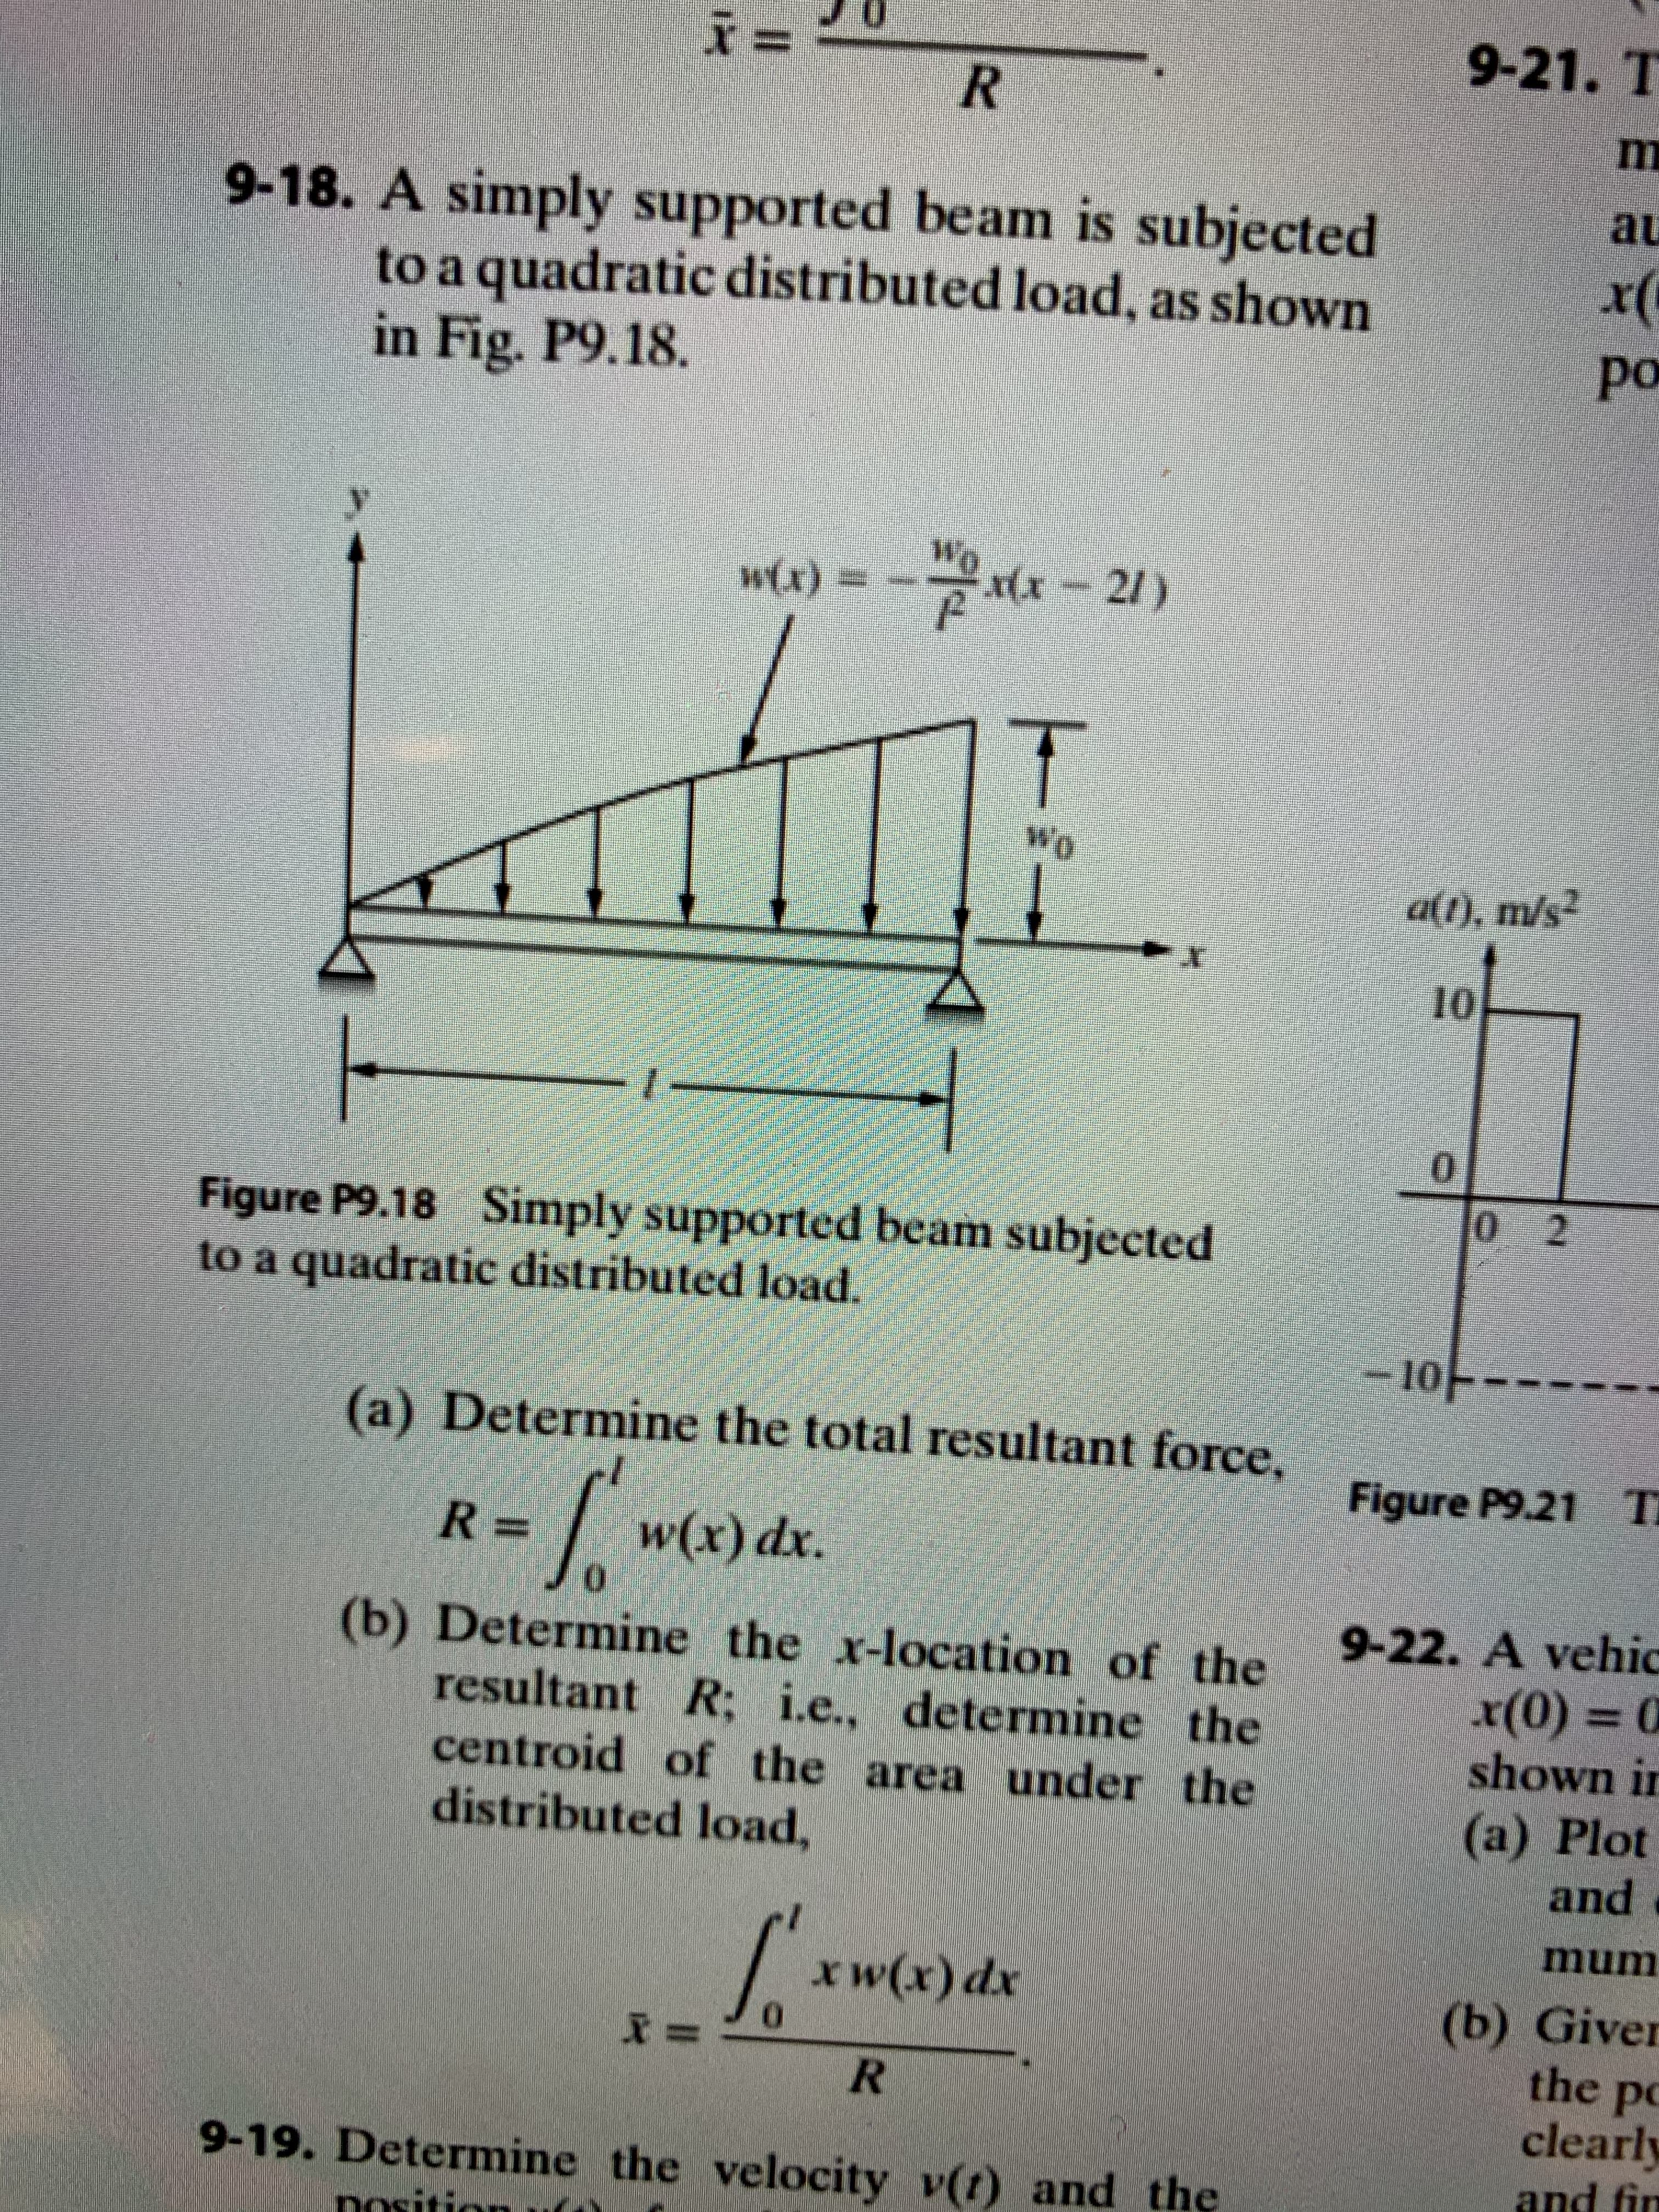 A simply supported beam is subjected
to a quadratic distributed load, as shown
in Fig. P9.18.
Wo
w(x) = -x(x-21)
